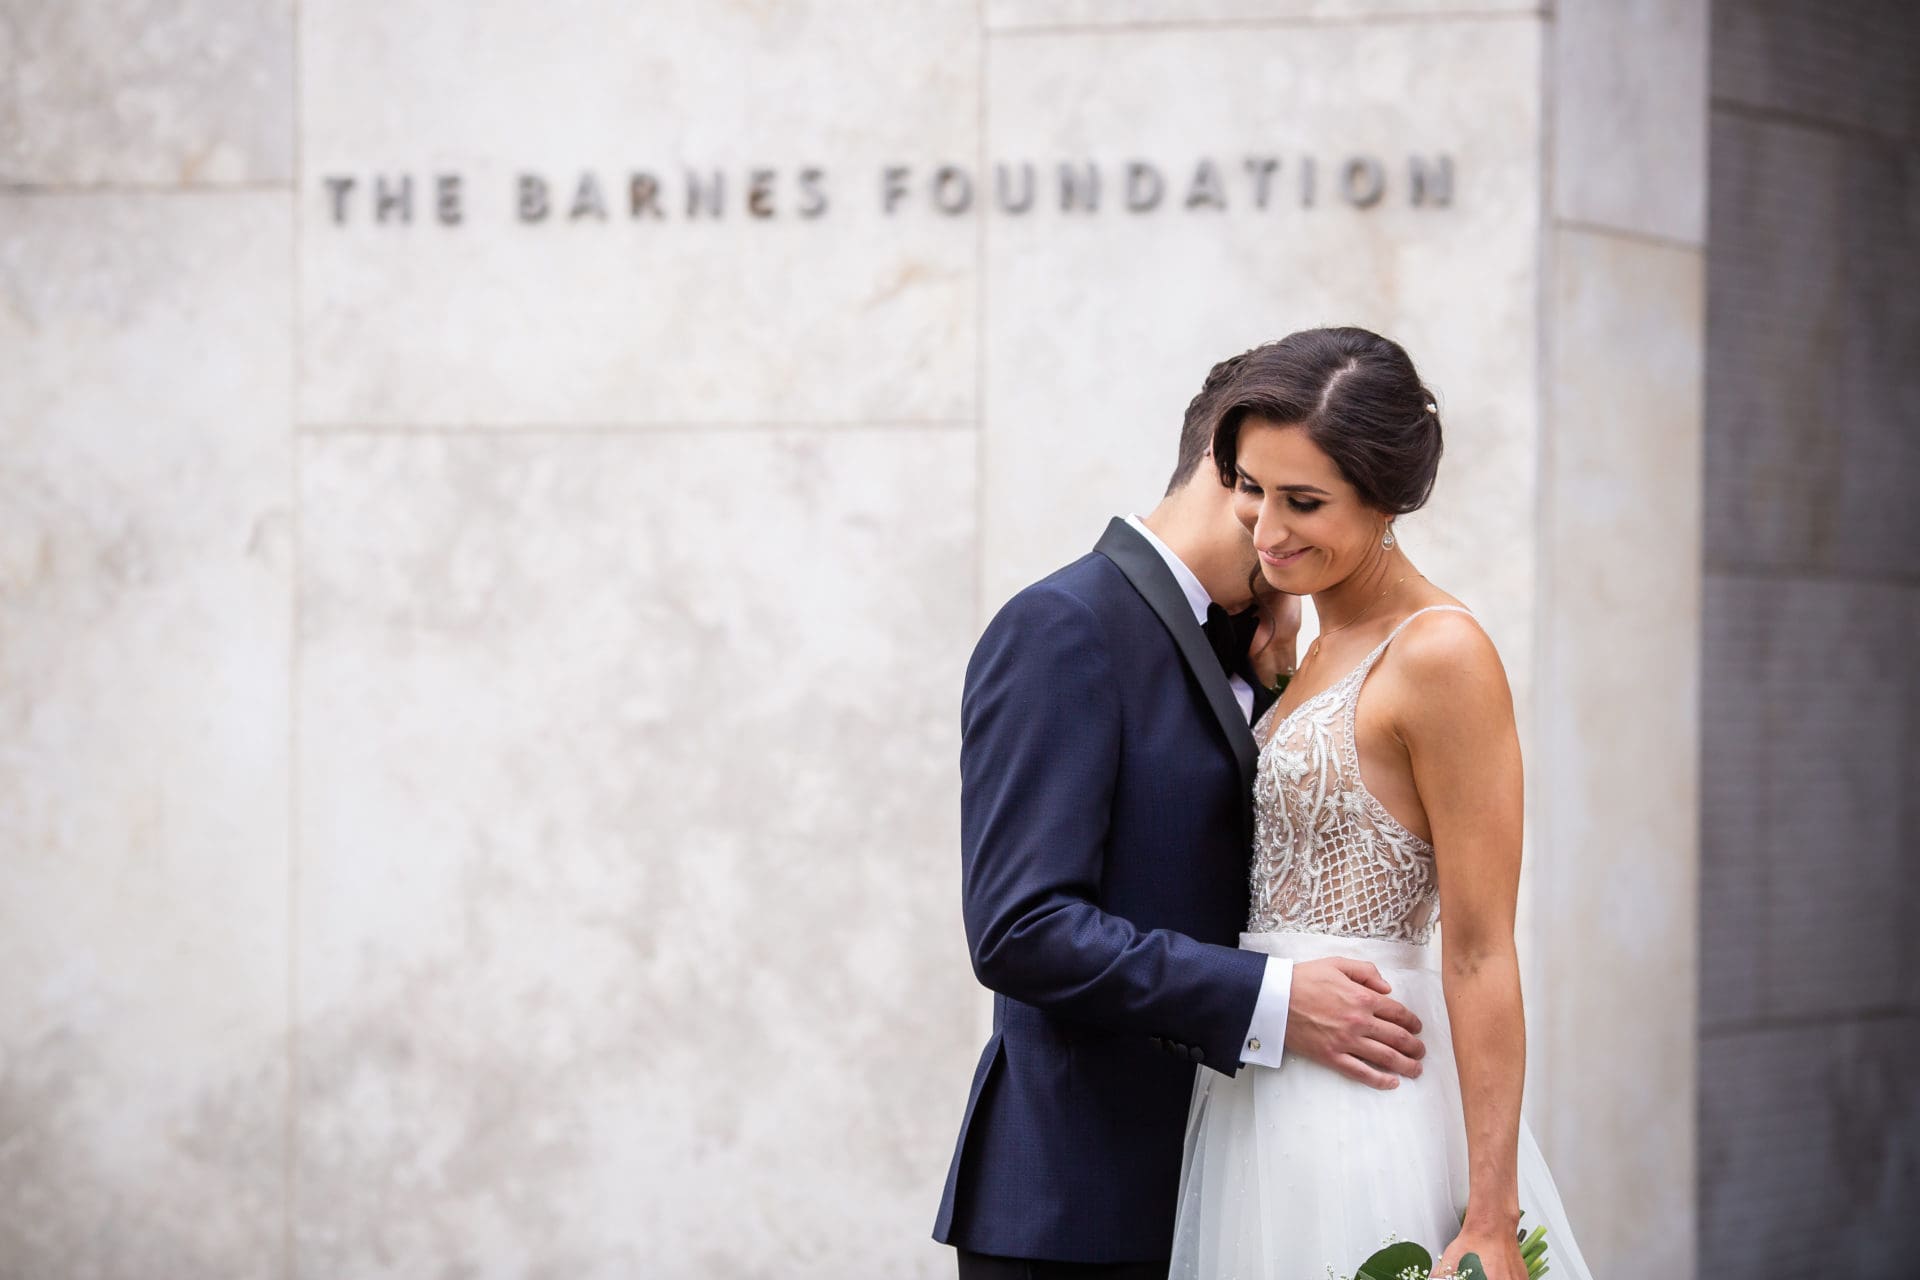 Bride and groom posing and laughing at the Barnes Foundation in Phiiladelphia